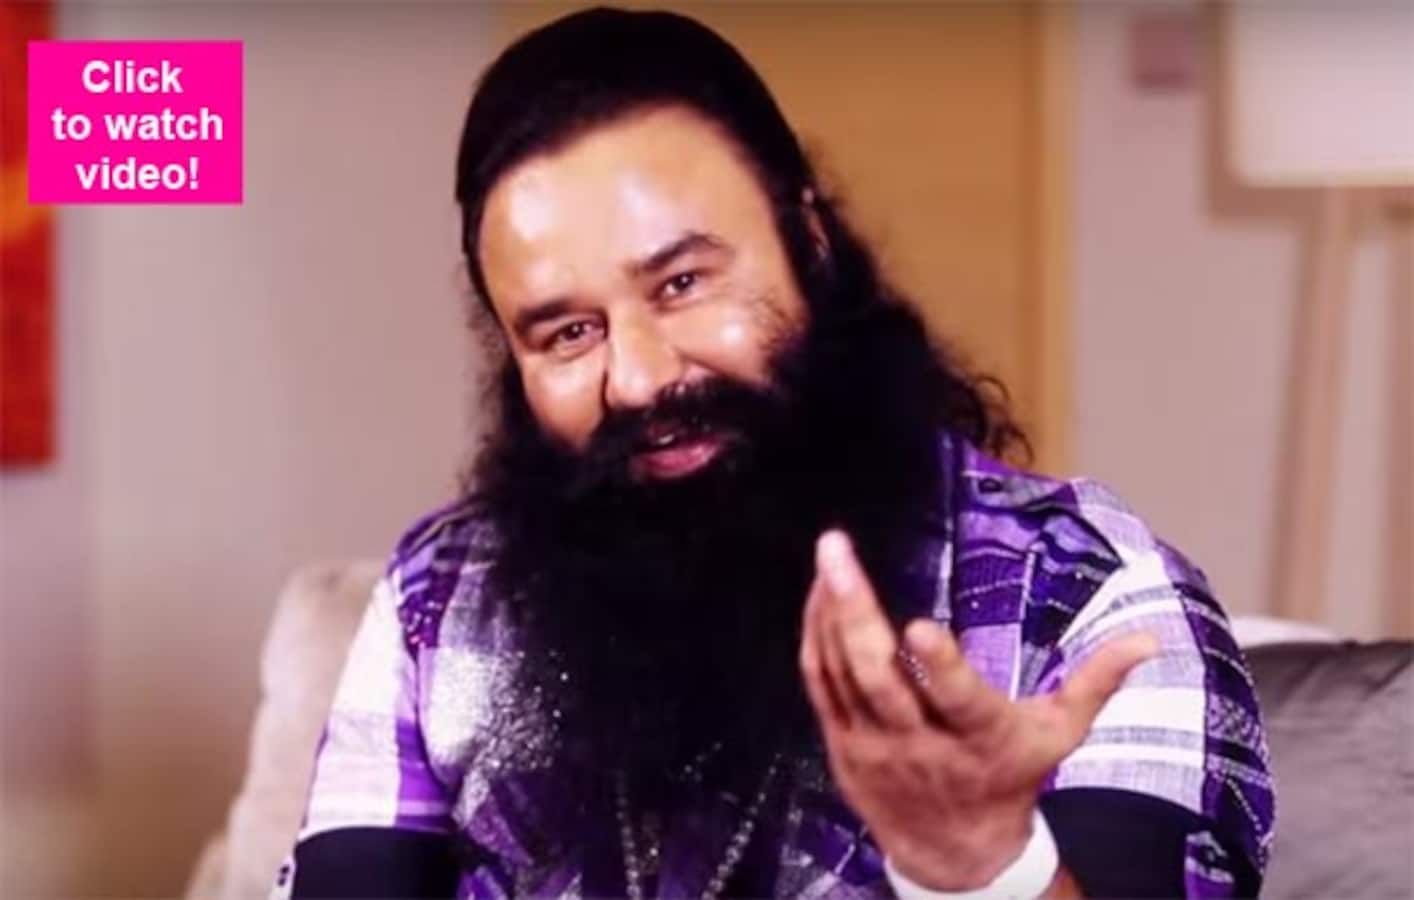 Gurmeet Ram Rahim Singh Insaan's TRUE mission will freak you out - watch  video! - Bollywood News & Gossip, Movie Reviews, Trailers & Videos at  